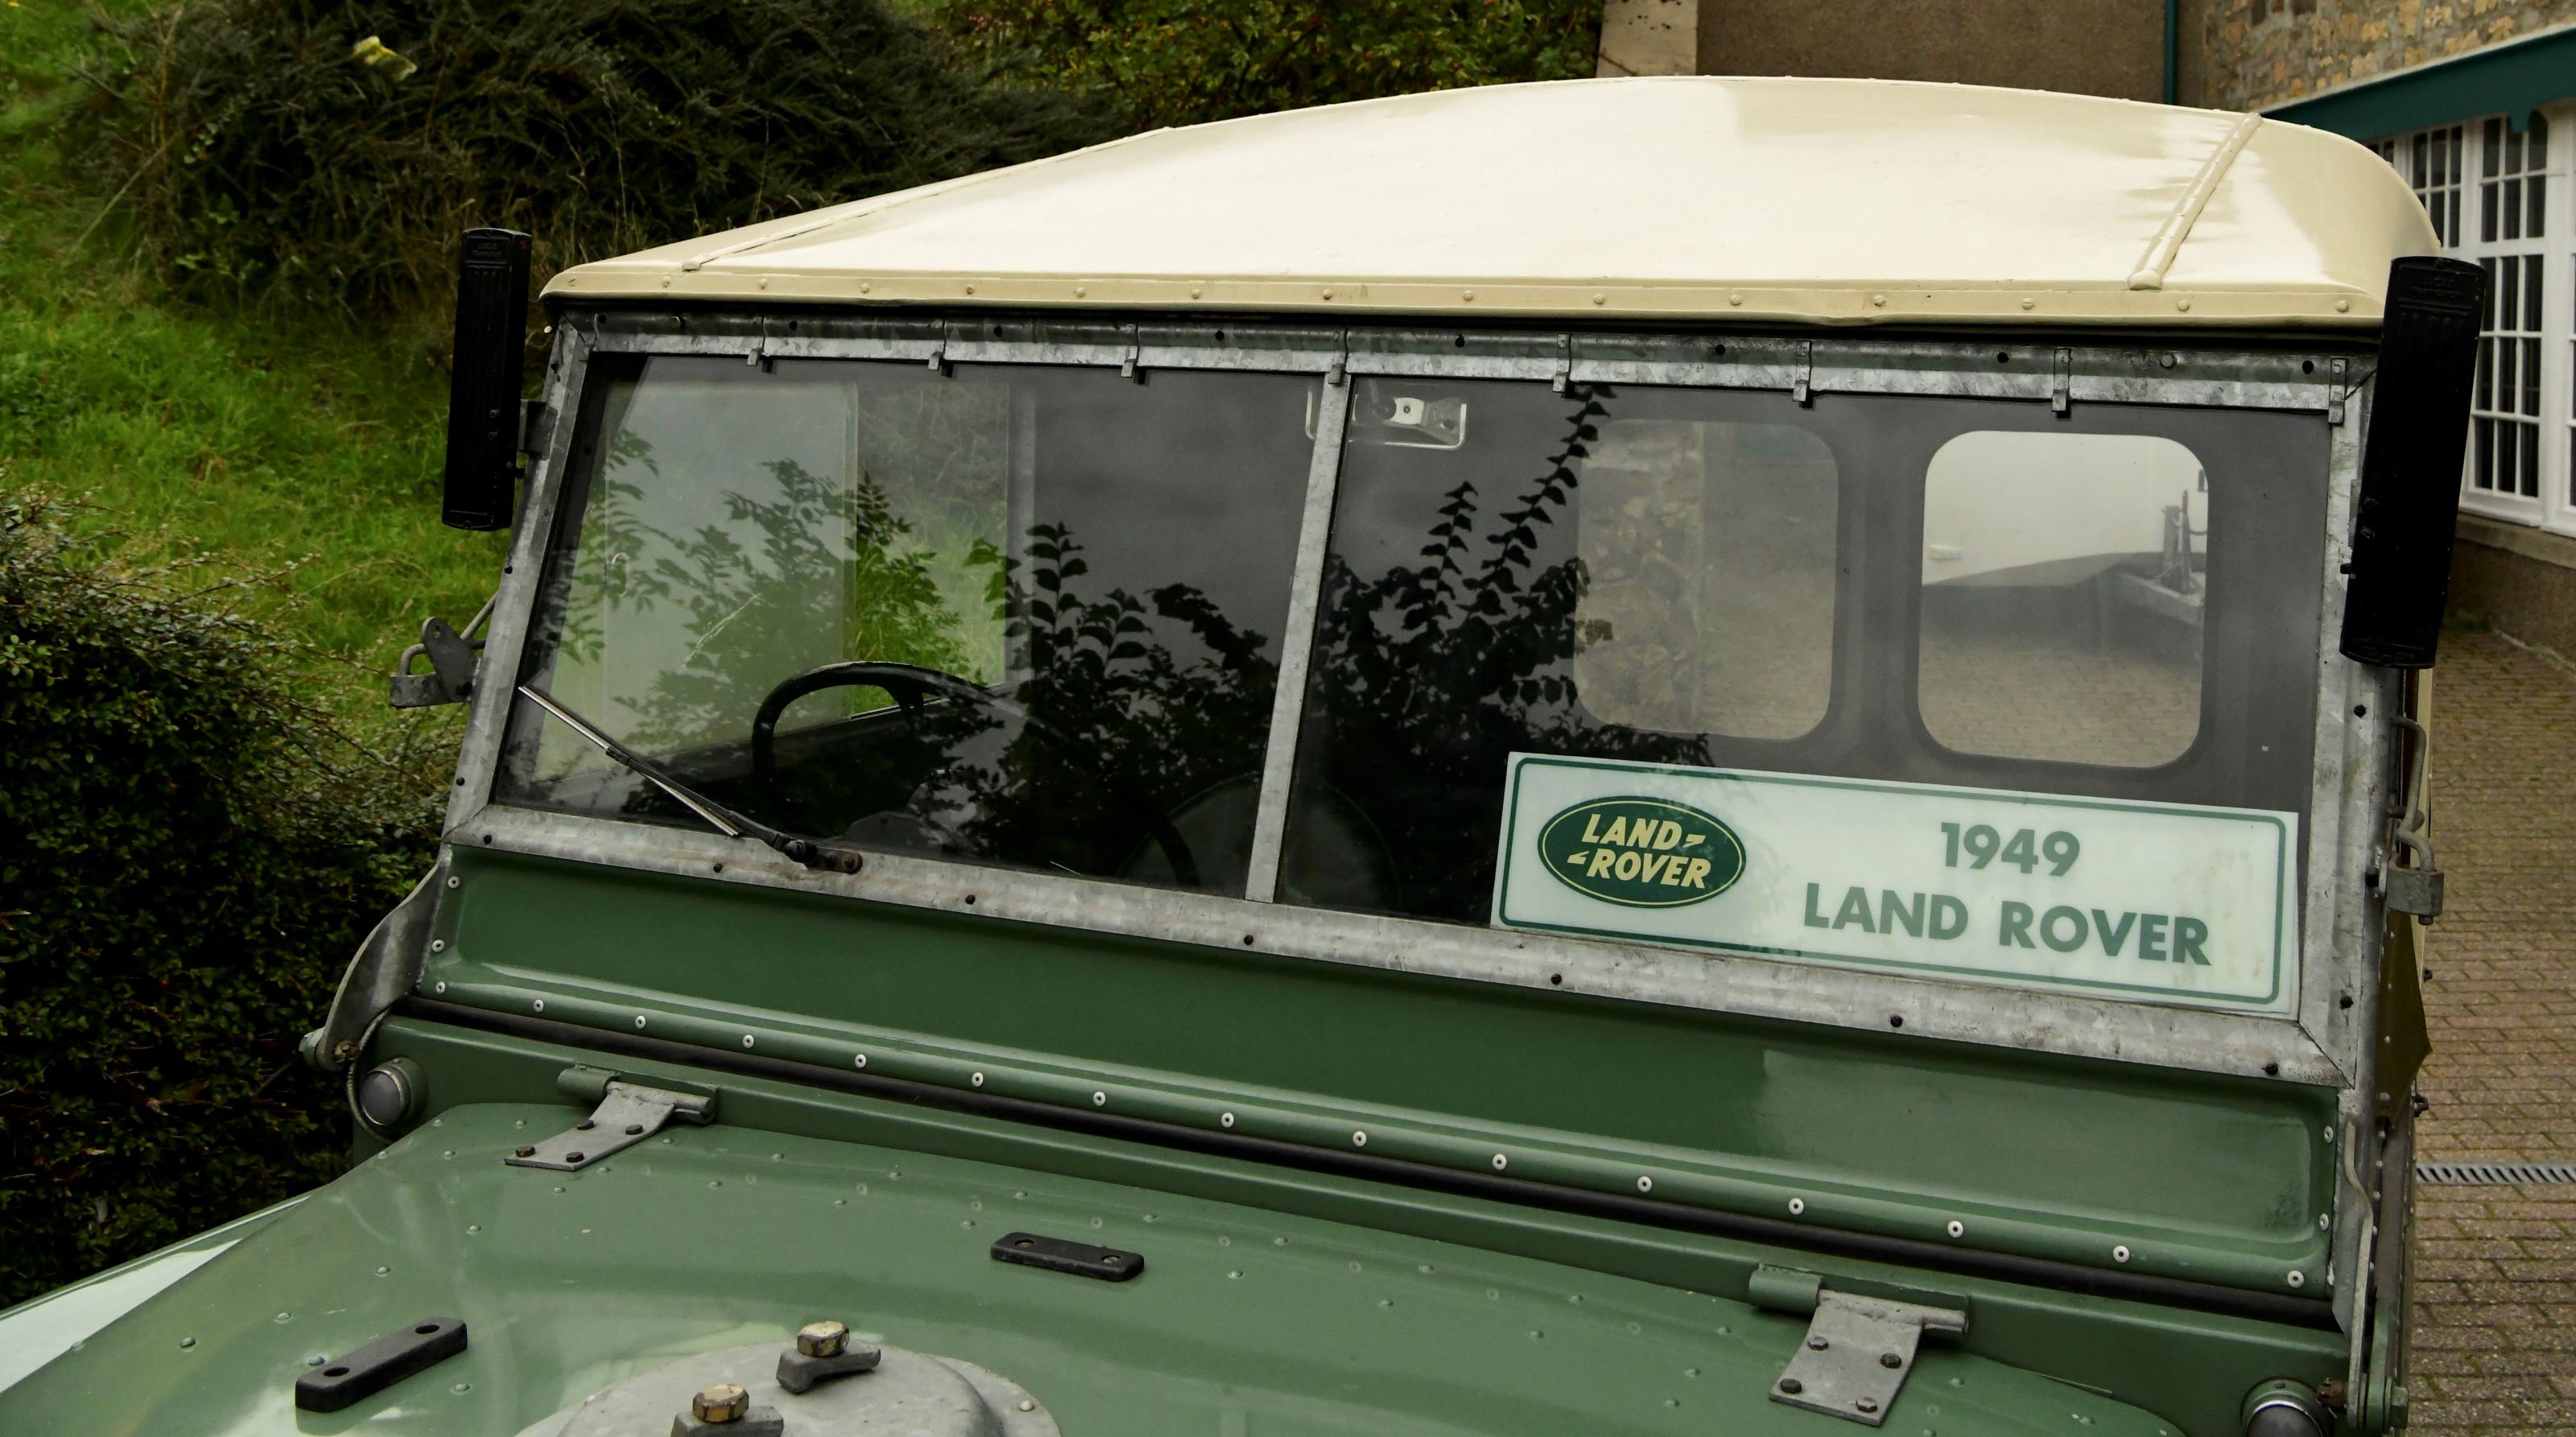 Land rover series 1 swb with hard top opi9 at8ja34m7rvsqd0e